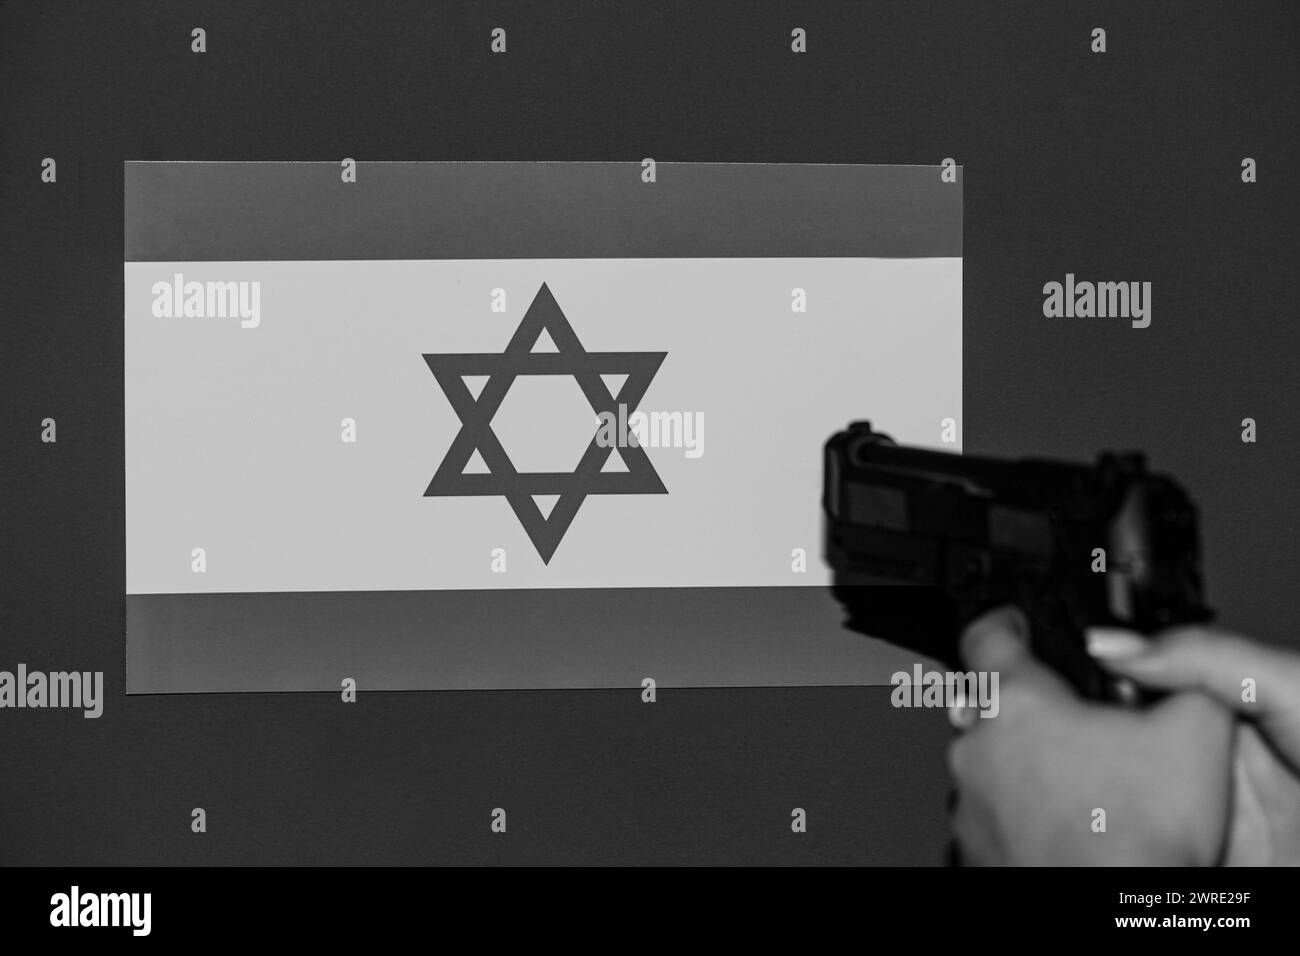 Flags of Israel and Palestine painted on cracked wall background. Concept of the Conflict between Israel and the Palestinian Authorities. High quality Stock Photo